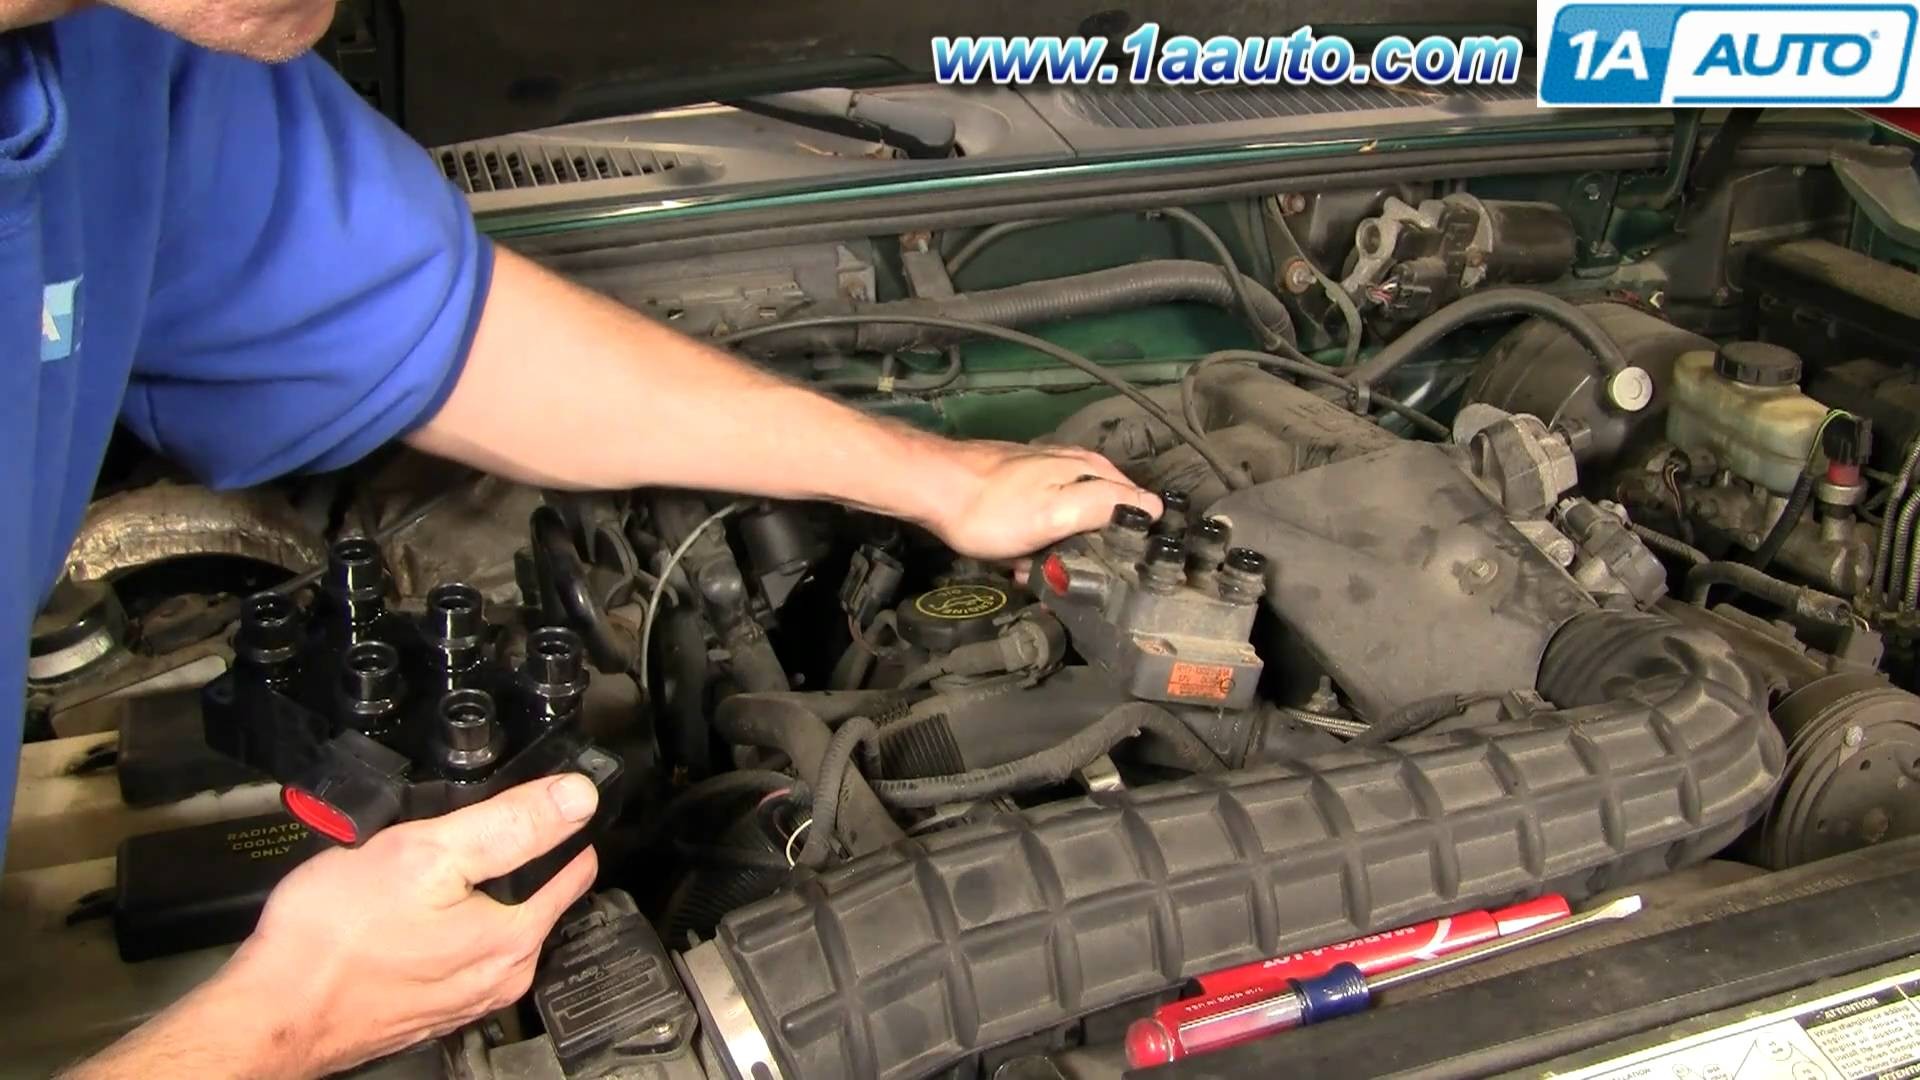 2003 ford Explorer Sport Trac Engine Diagram How to Install Replace Ignition Coil ford Explorer Mercury Of 2003 ford Explorer Sport Trac Engine Diagram